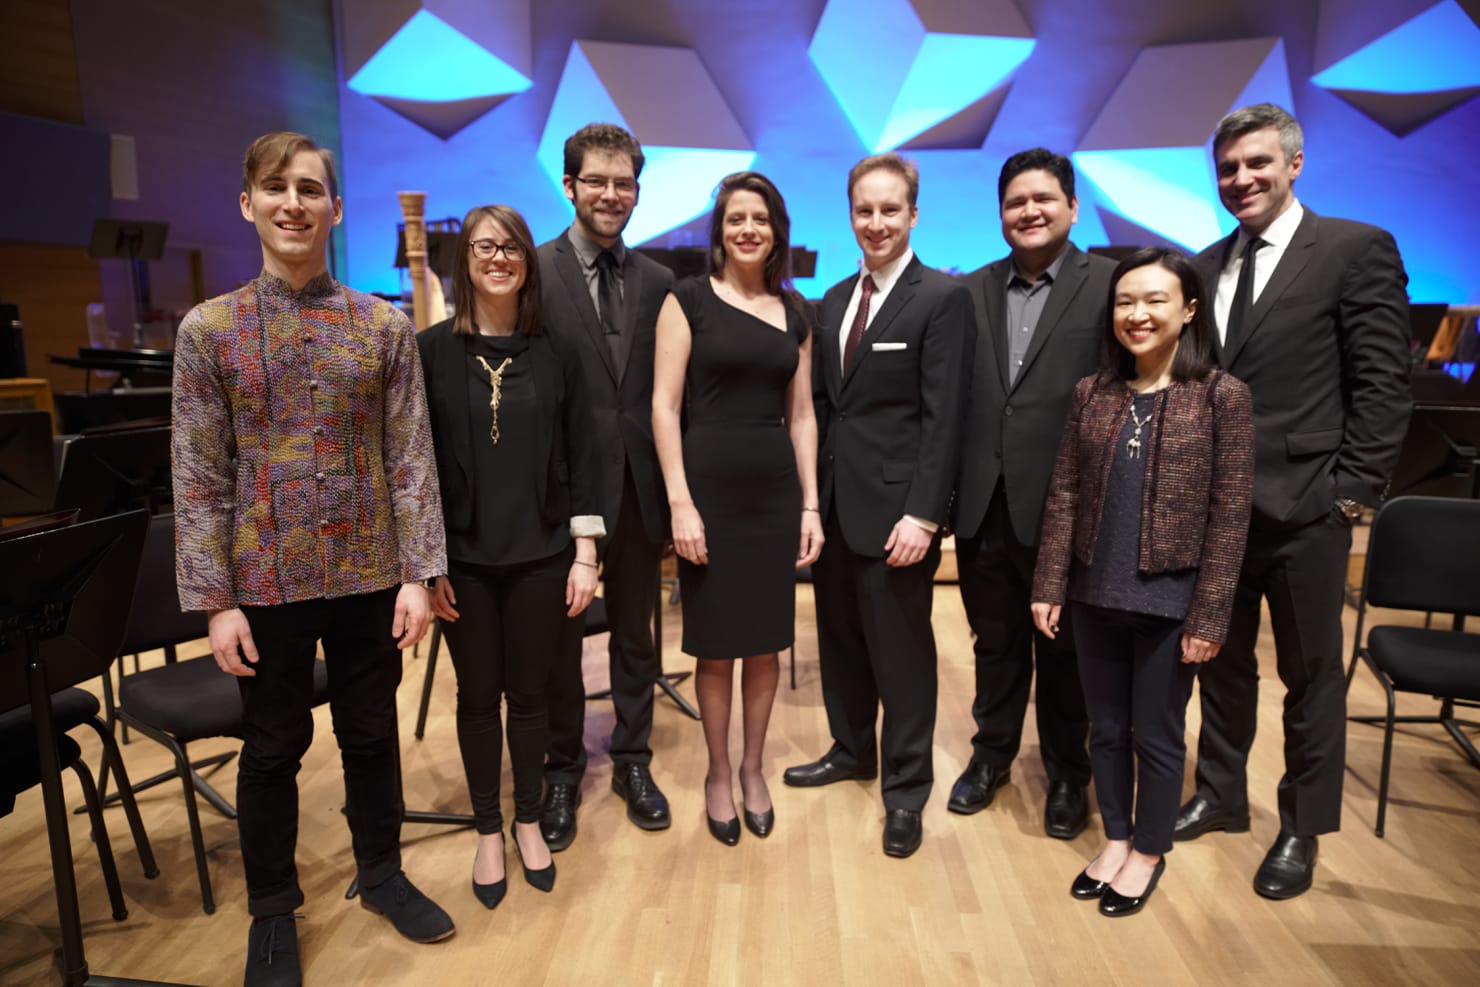 The participants in the February 2017 Minnesota Orchestra Composer Institute: Conrad Winslow, Katherine Balch, Phil Taylor, Judy Bozone, Michael Boyman, Michael-Thomas Foumai and Tonia Ko, with Composer Institute Director Kevin Puts at right.